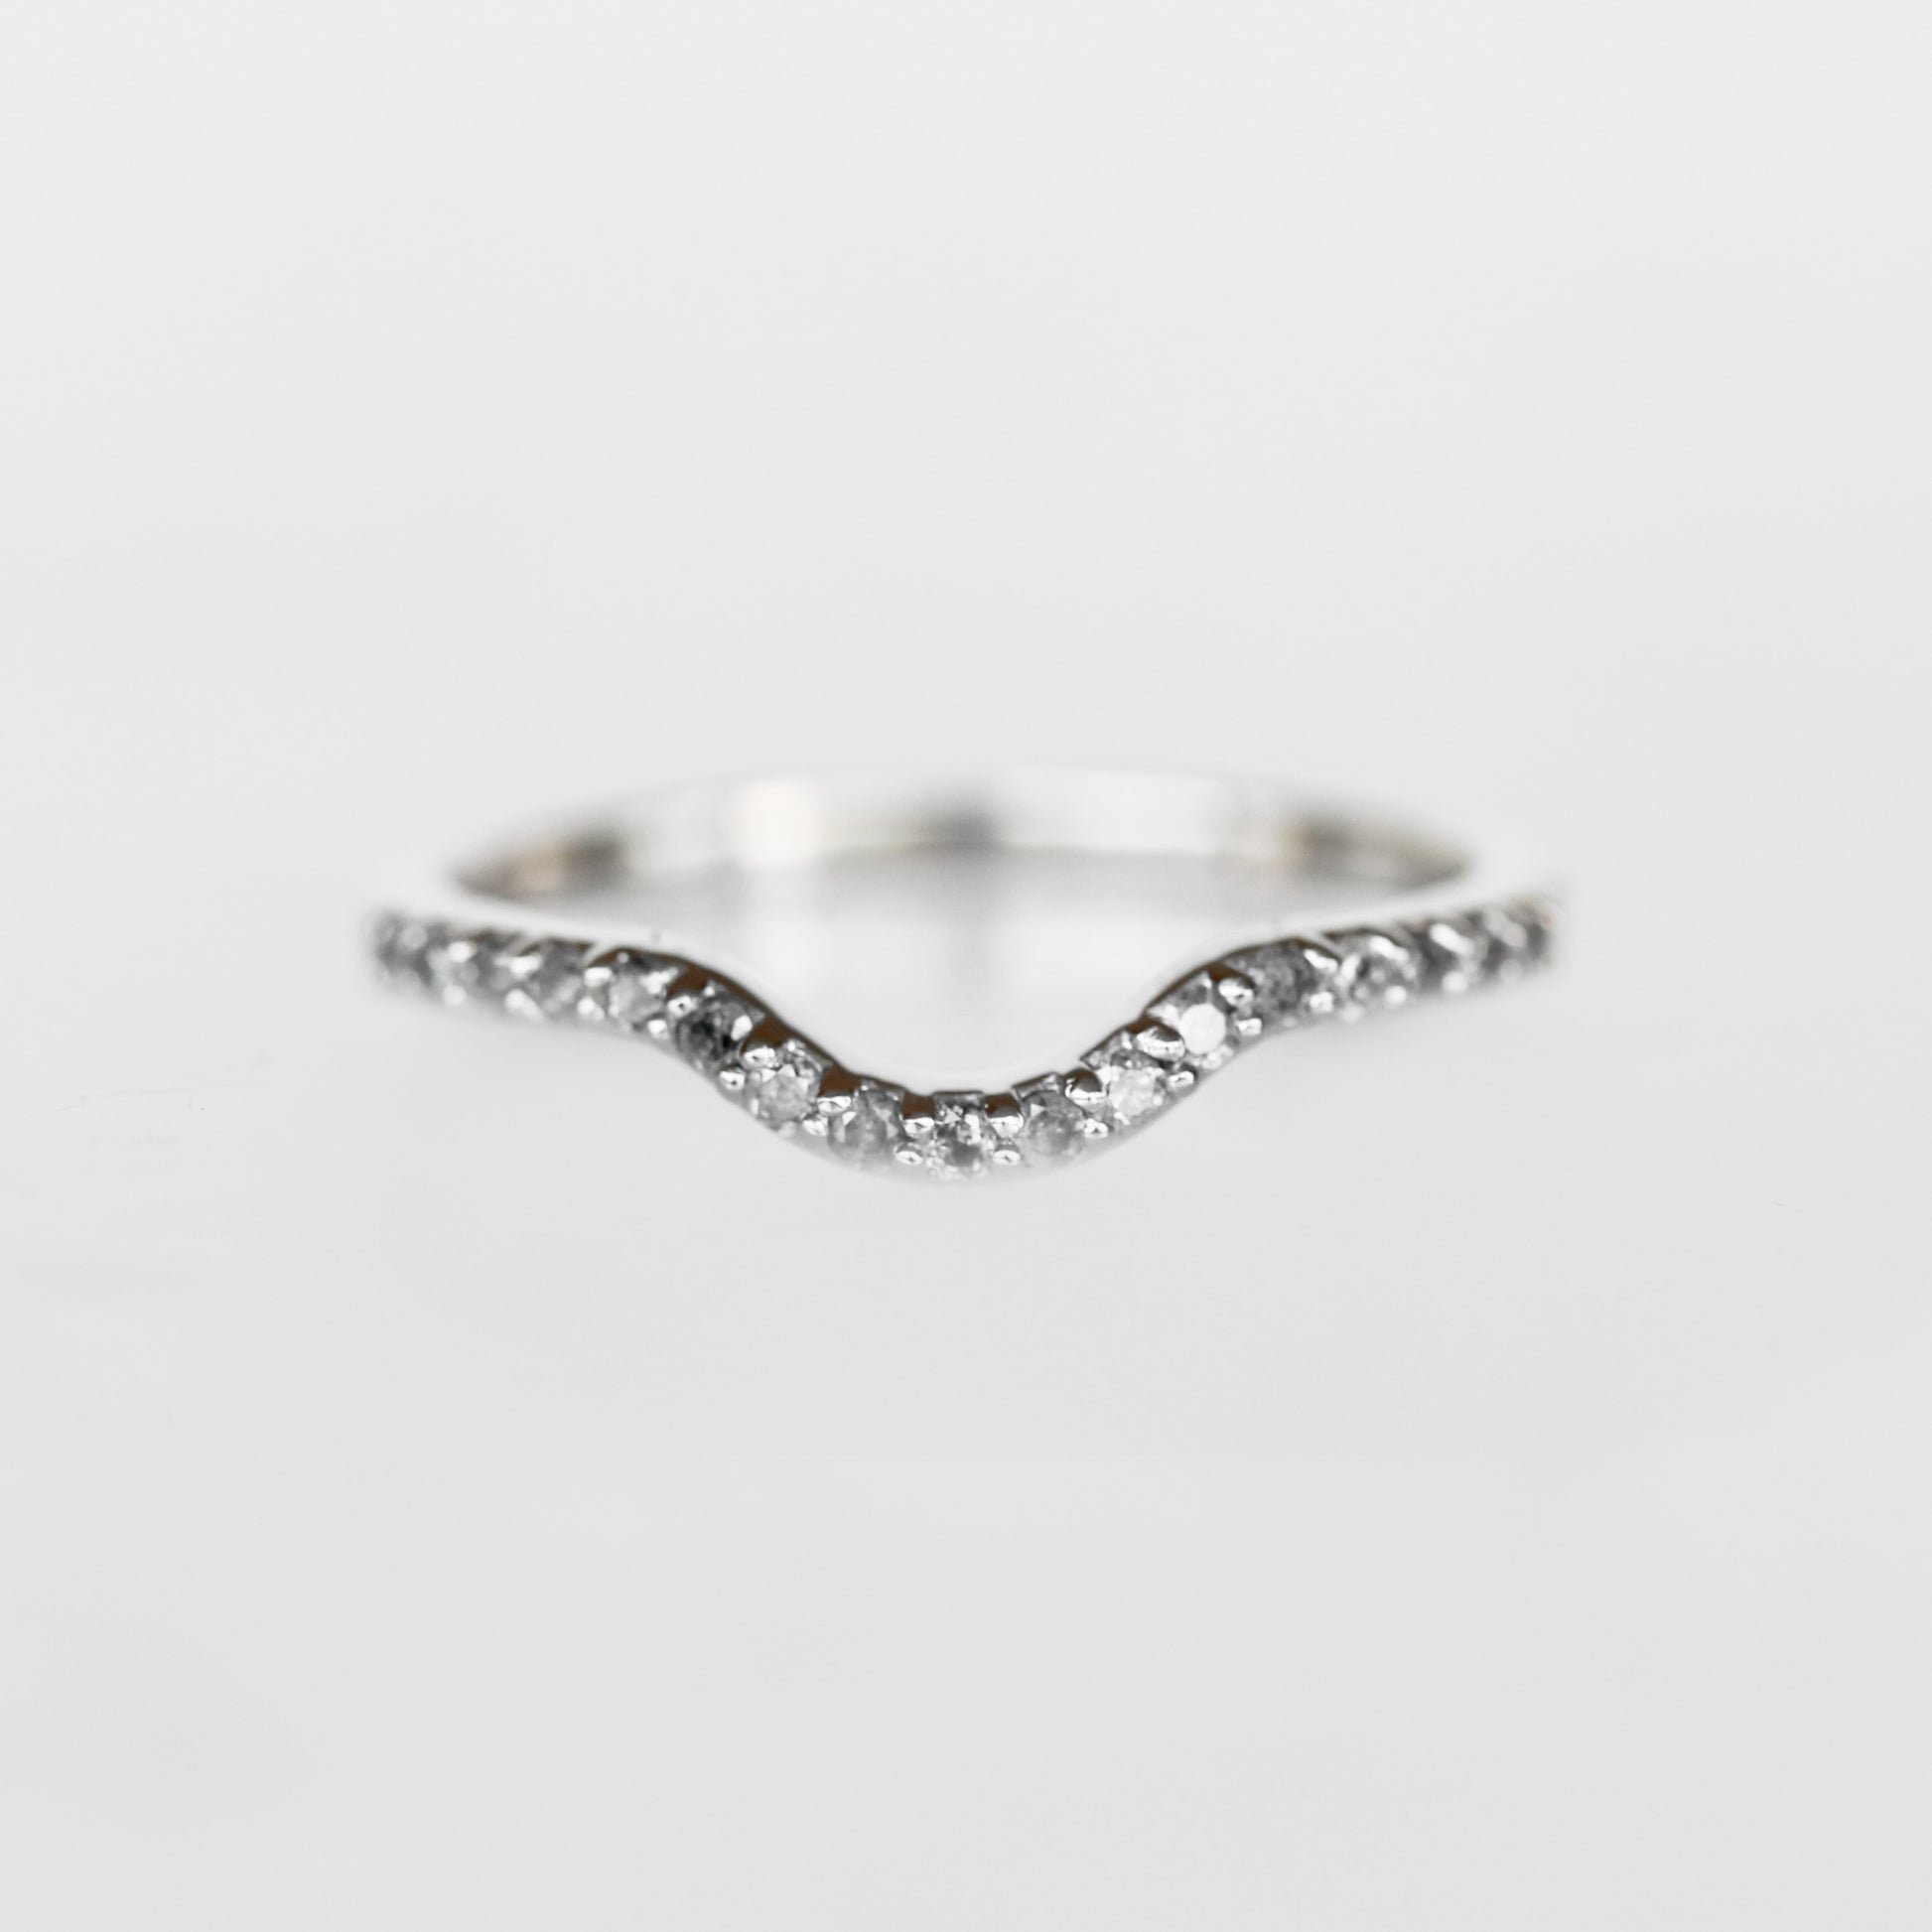 Walsh Wedding Band - Curved Contour Gray Diamond Band - 14K Gold of Choice - Midwinter Co. Alternative Bridal Rings and Modern Fine Jewelry